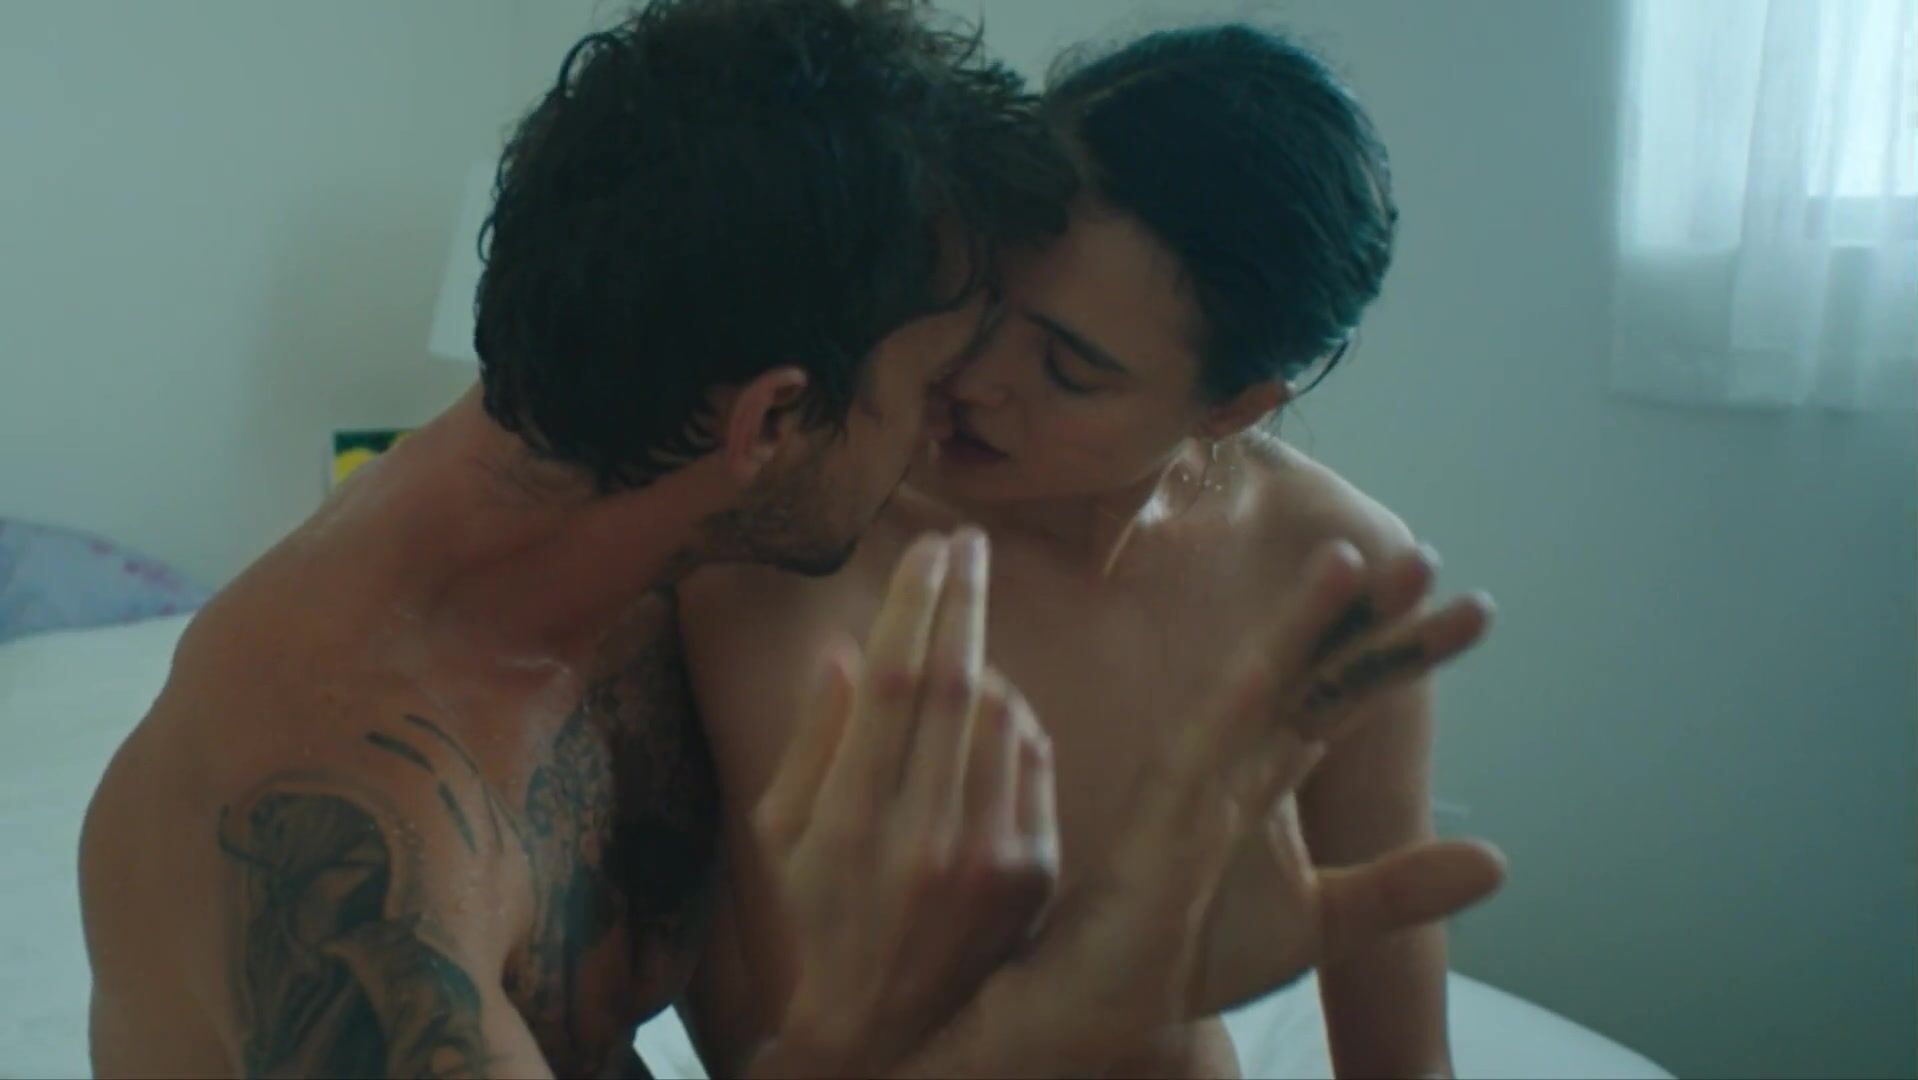 Footworship Man fucks petite actress Margaret Qualley in music video Love Me Like You Hate Me Cum On Face